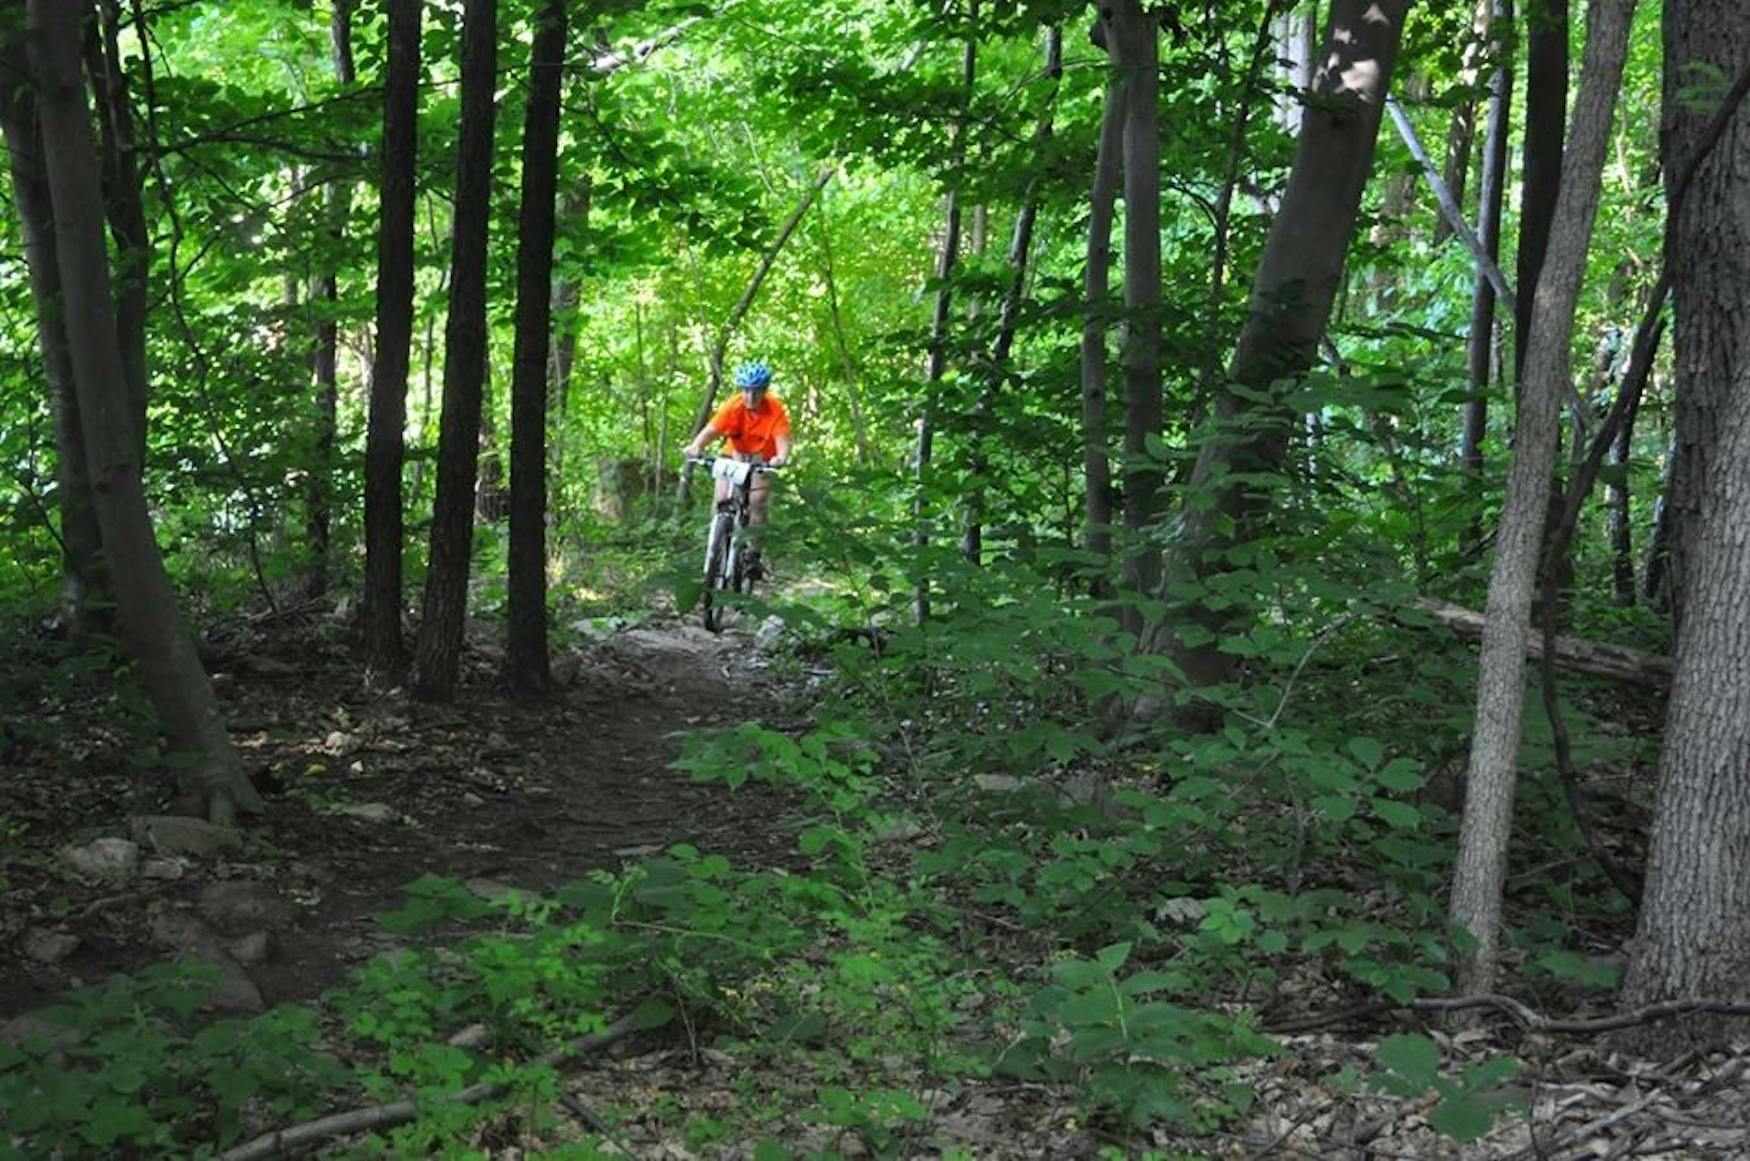 PEDAL TO THE METAL: Hochman bikes through the beginning of the mountain-bike section of the Xterra Dirty Grizzly, winning first in her age group at her first triathlon, near her home in Bear Creek Ski Resort in Macungie, PA.